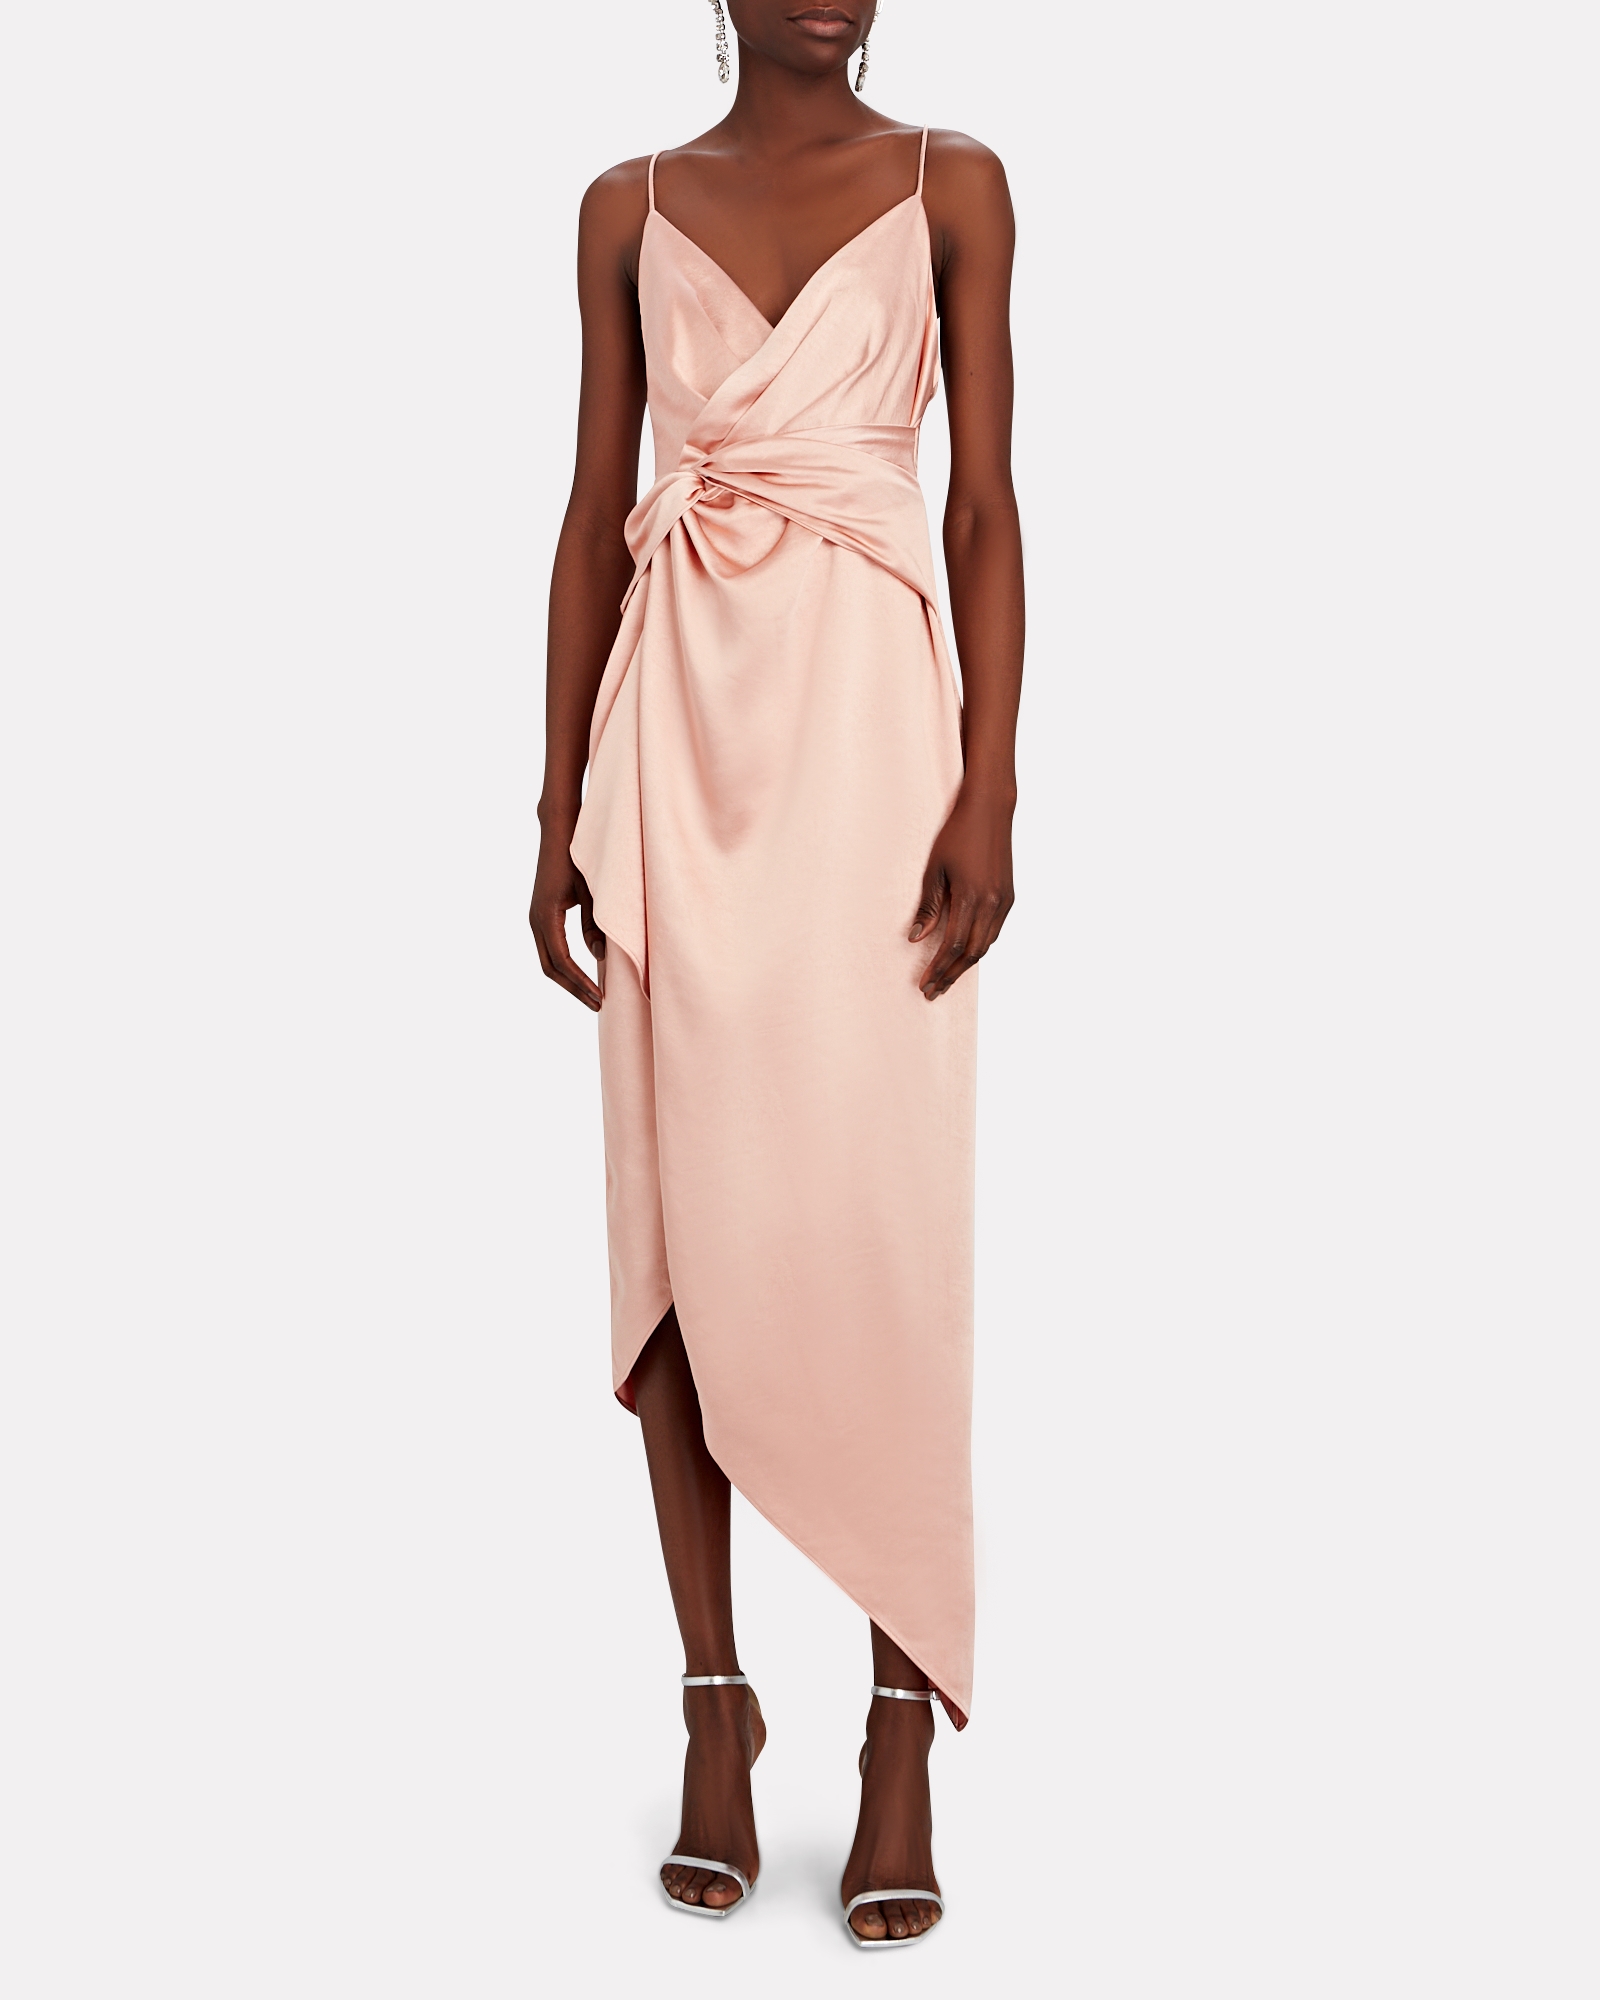 Significant Other Elise Ruched Satin Midi Dress | INTERMIX®